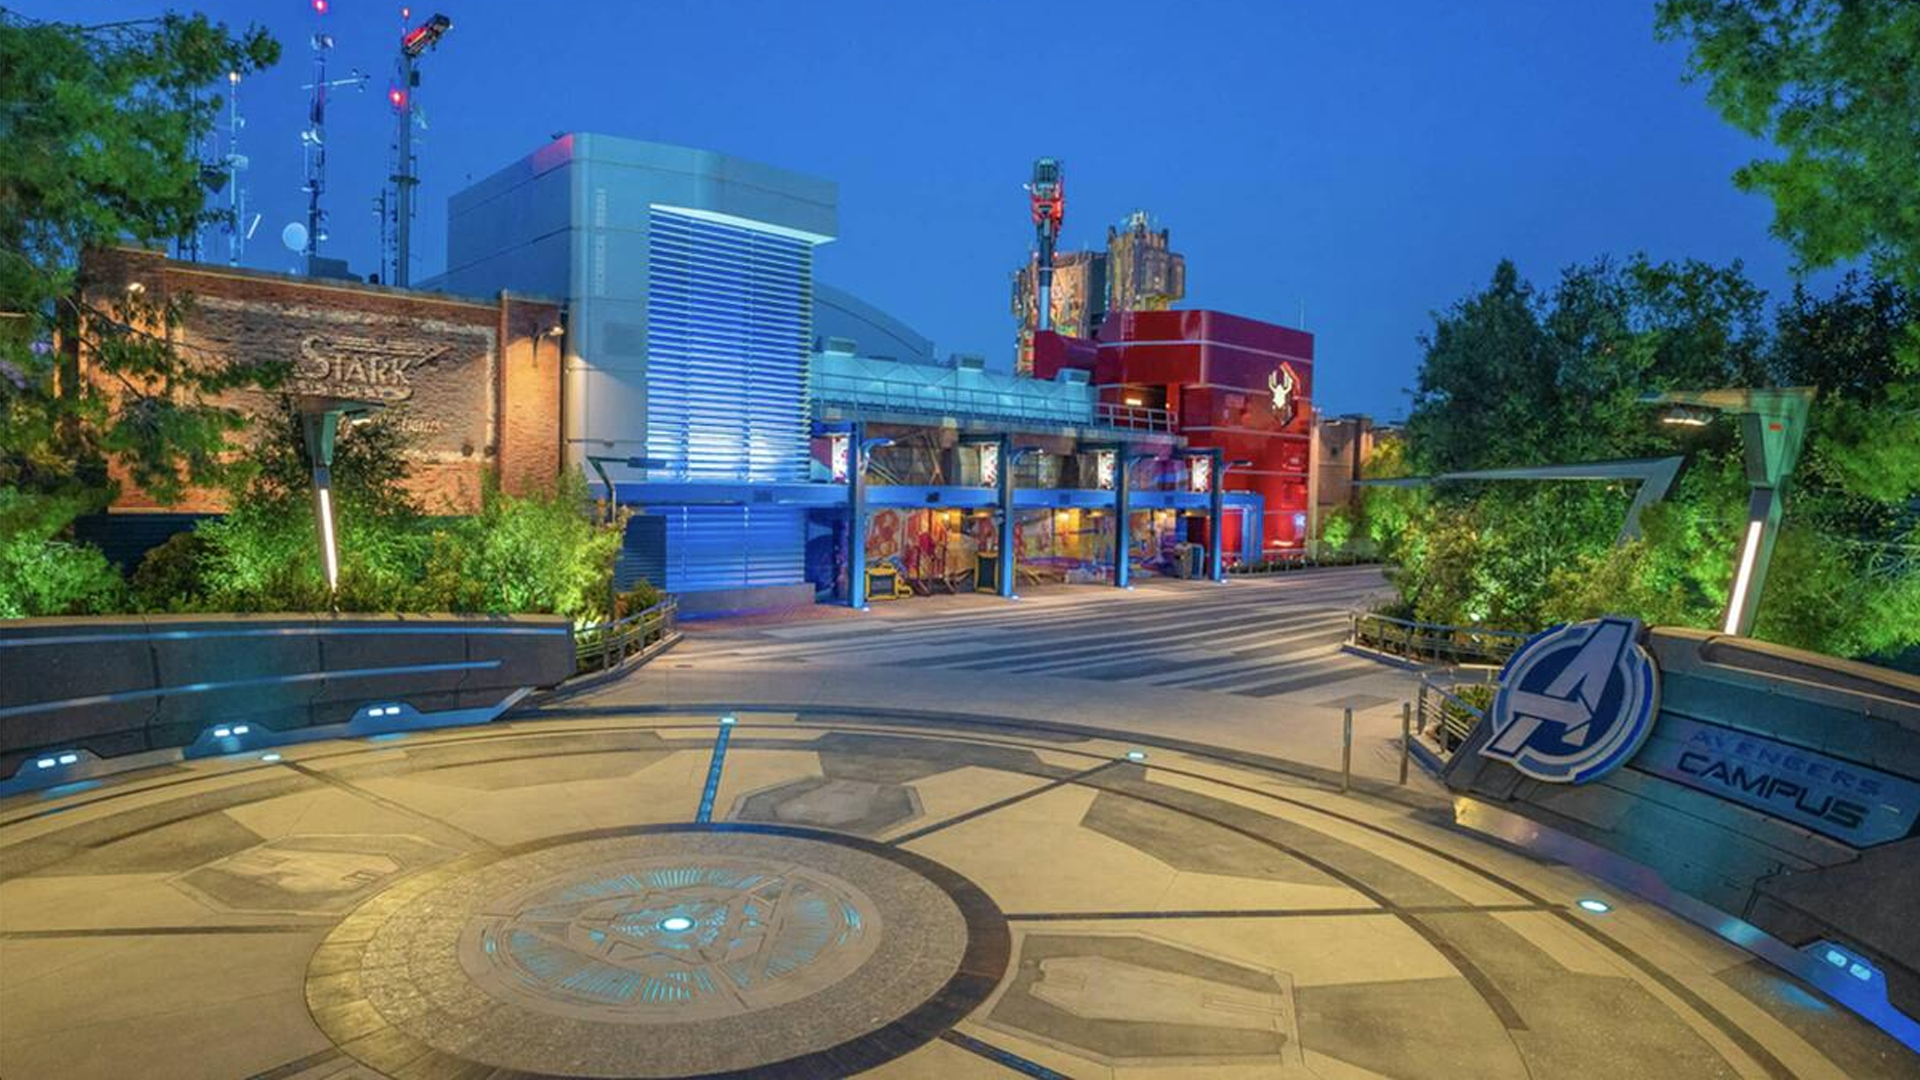 Oh Snap: Marvel’s Avengers Campus Opens June 4th at Disney California Adventure